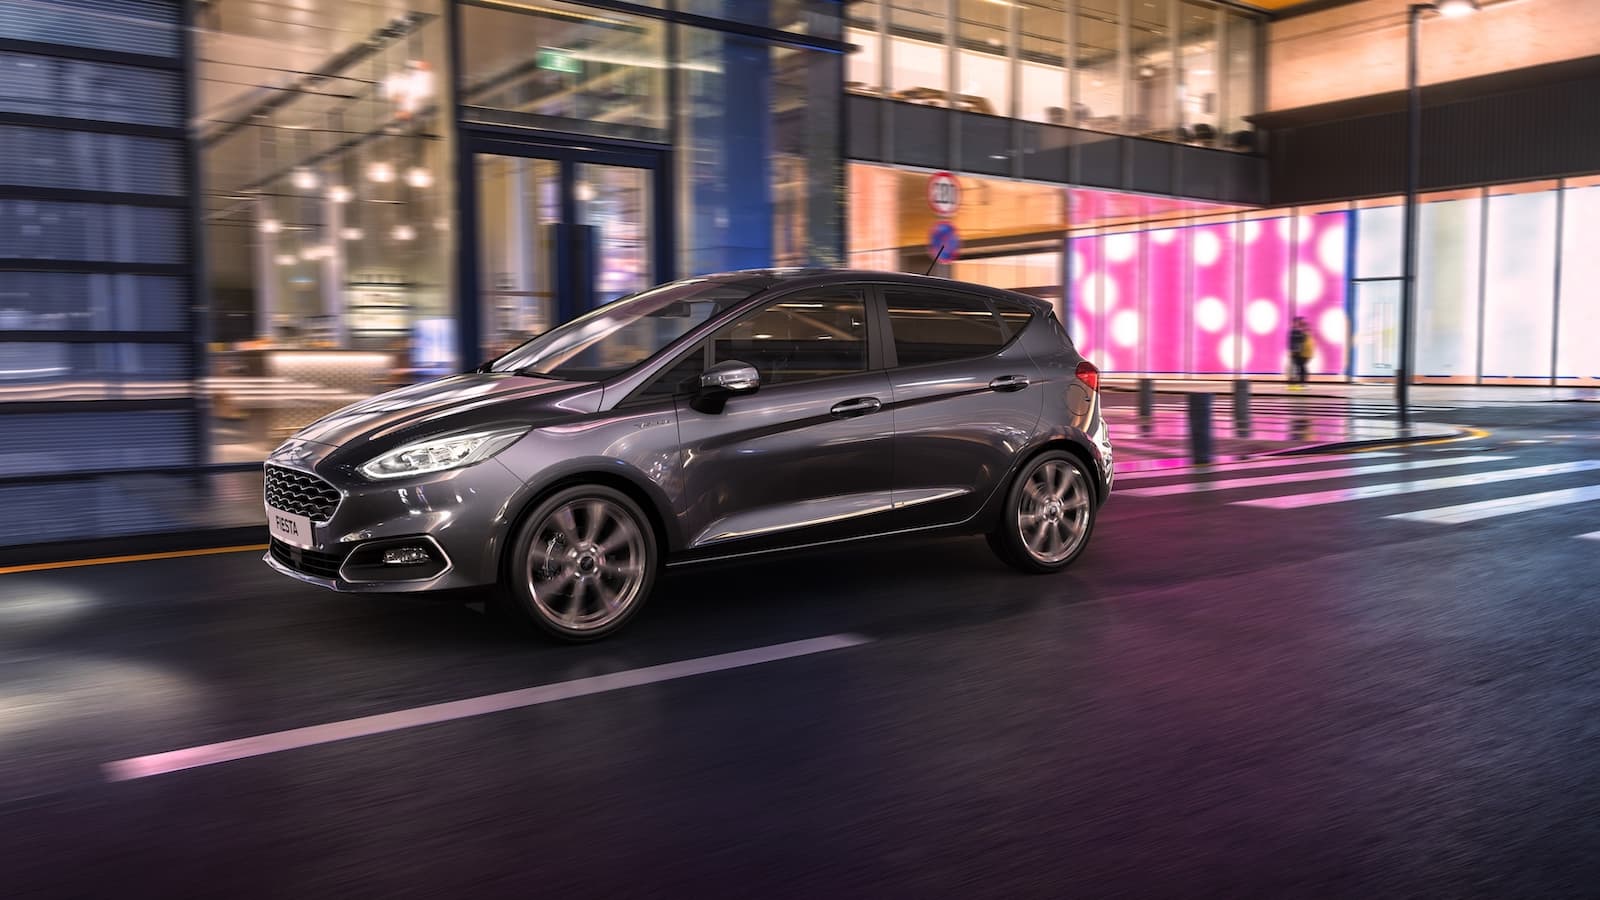 Ford Fiesta at night | August 2020